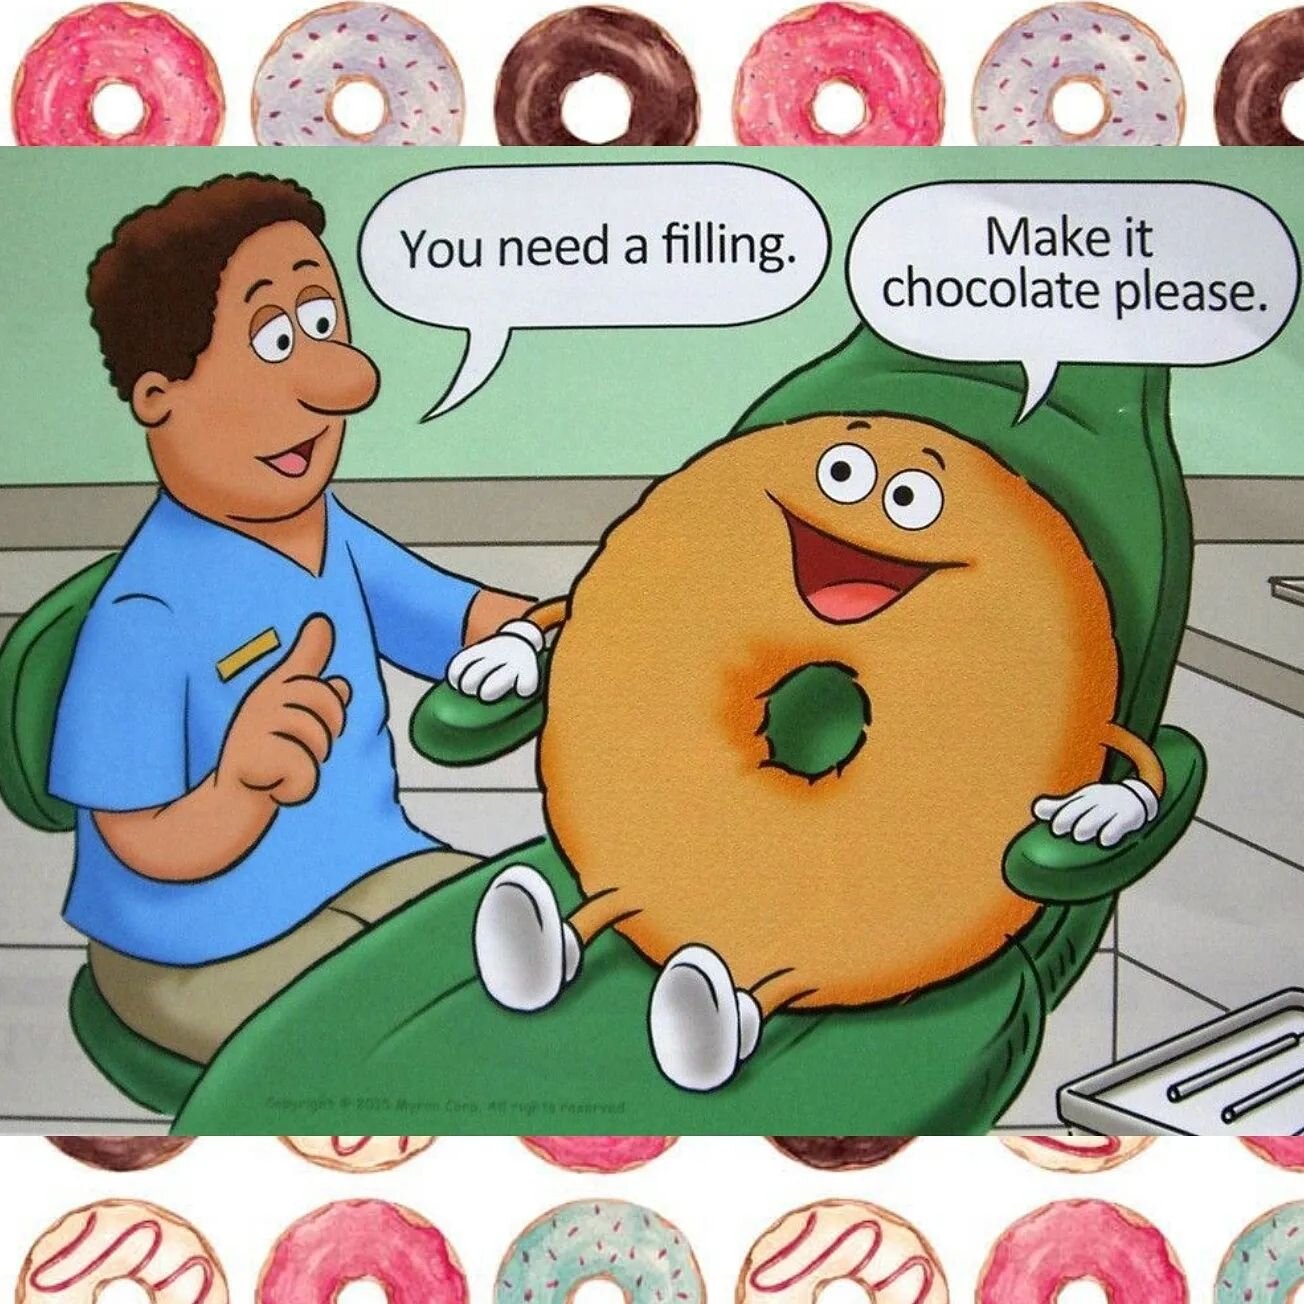 Happy National Donut Day from all of us at Clayton Family DDS! We hope you enjoy all the &quot;fillings&quot; today. 😁🍩